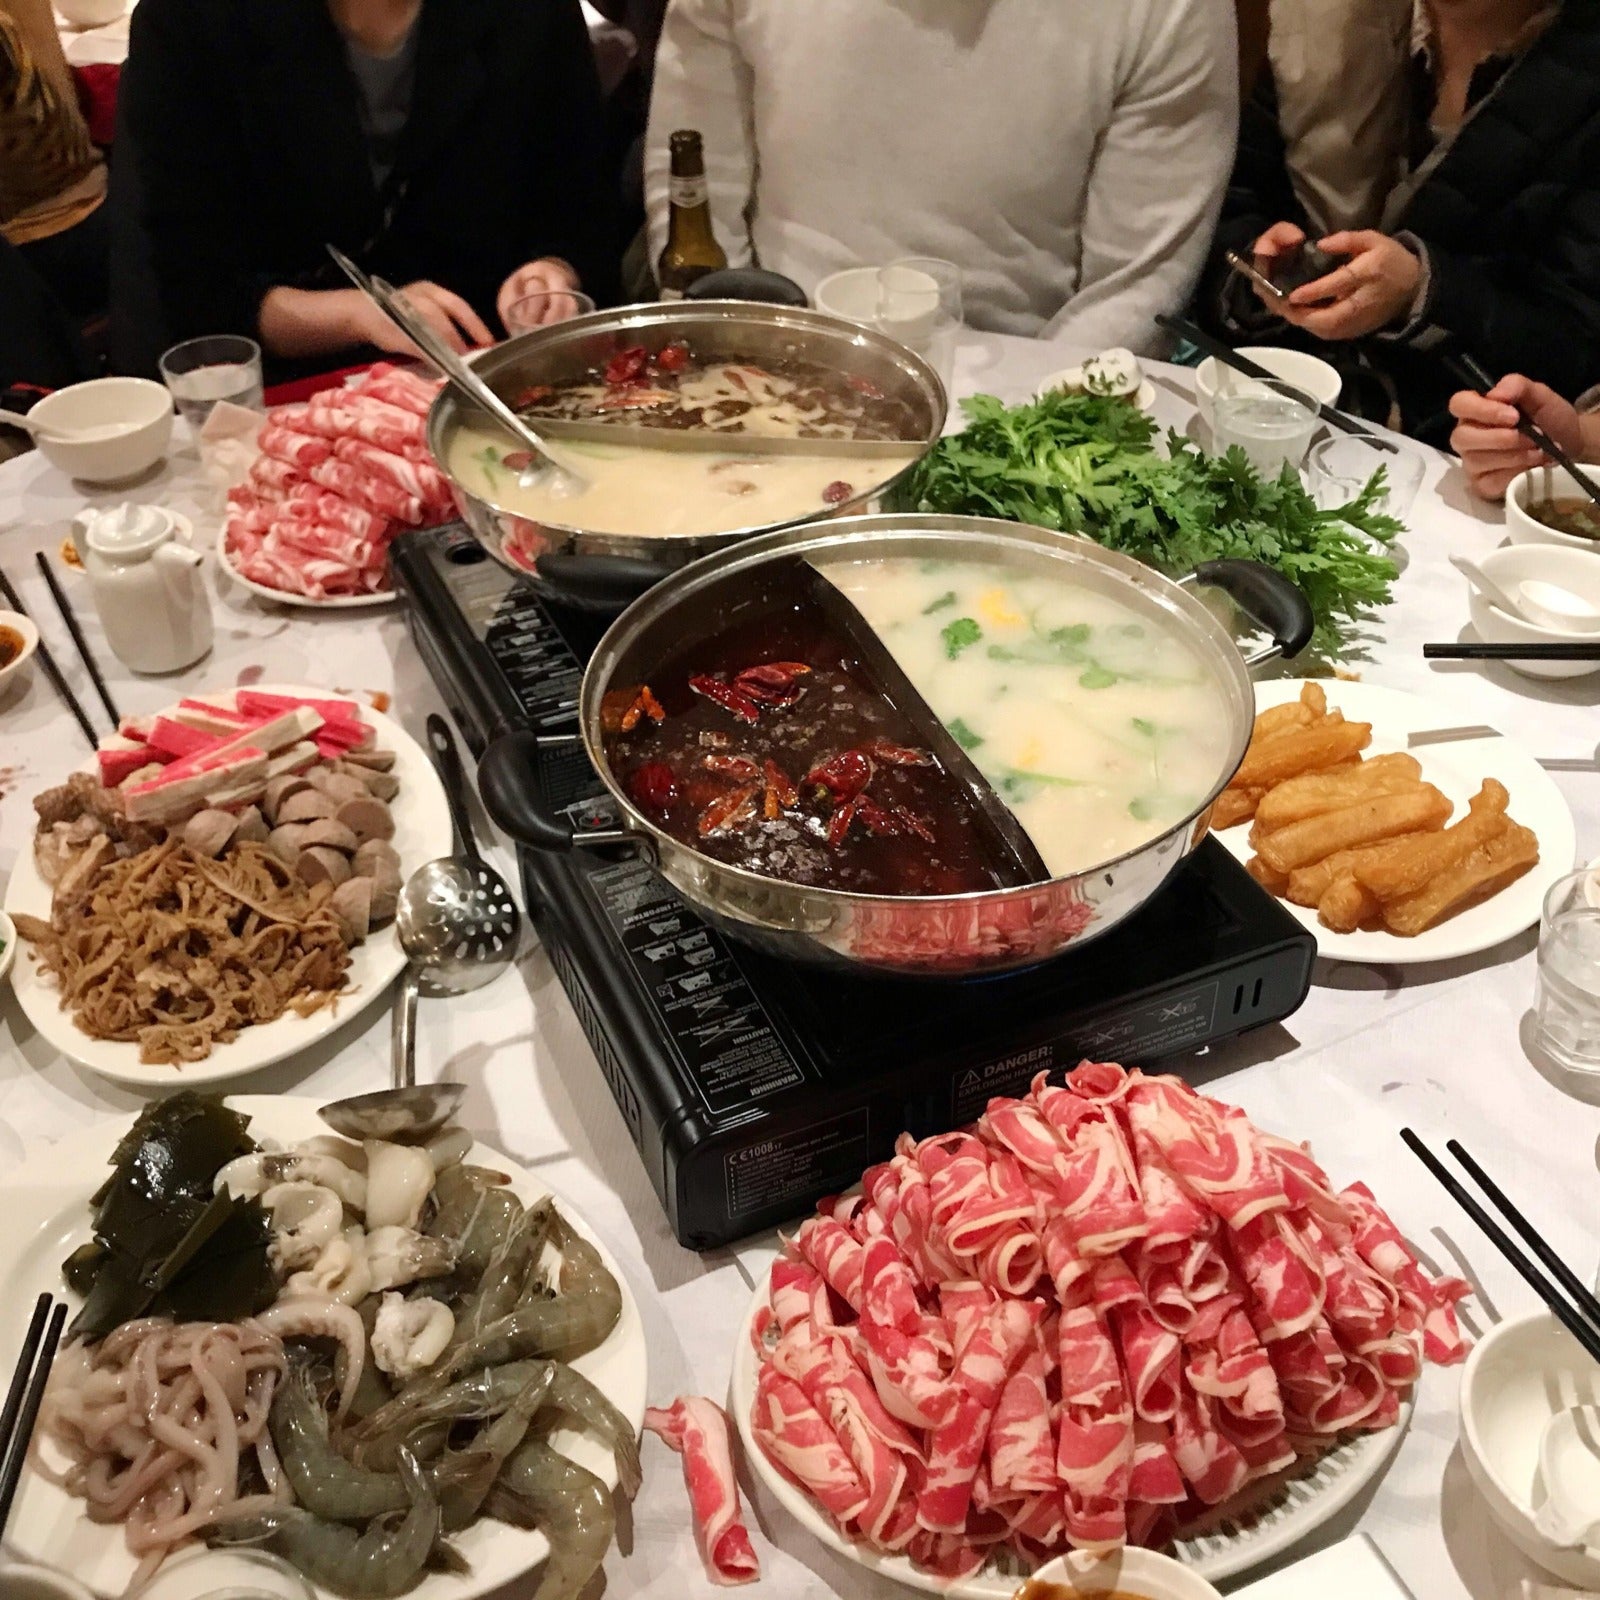 Experts: Hotpot Is Seriously Unhealthy & You Should Only Eat It Once a Month - WORLD OF BUZZ 2